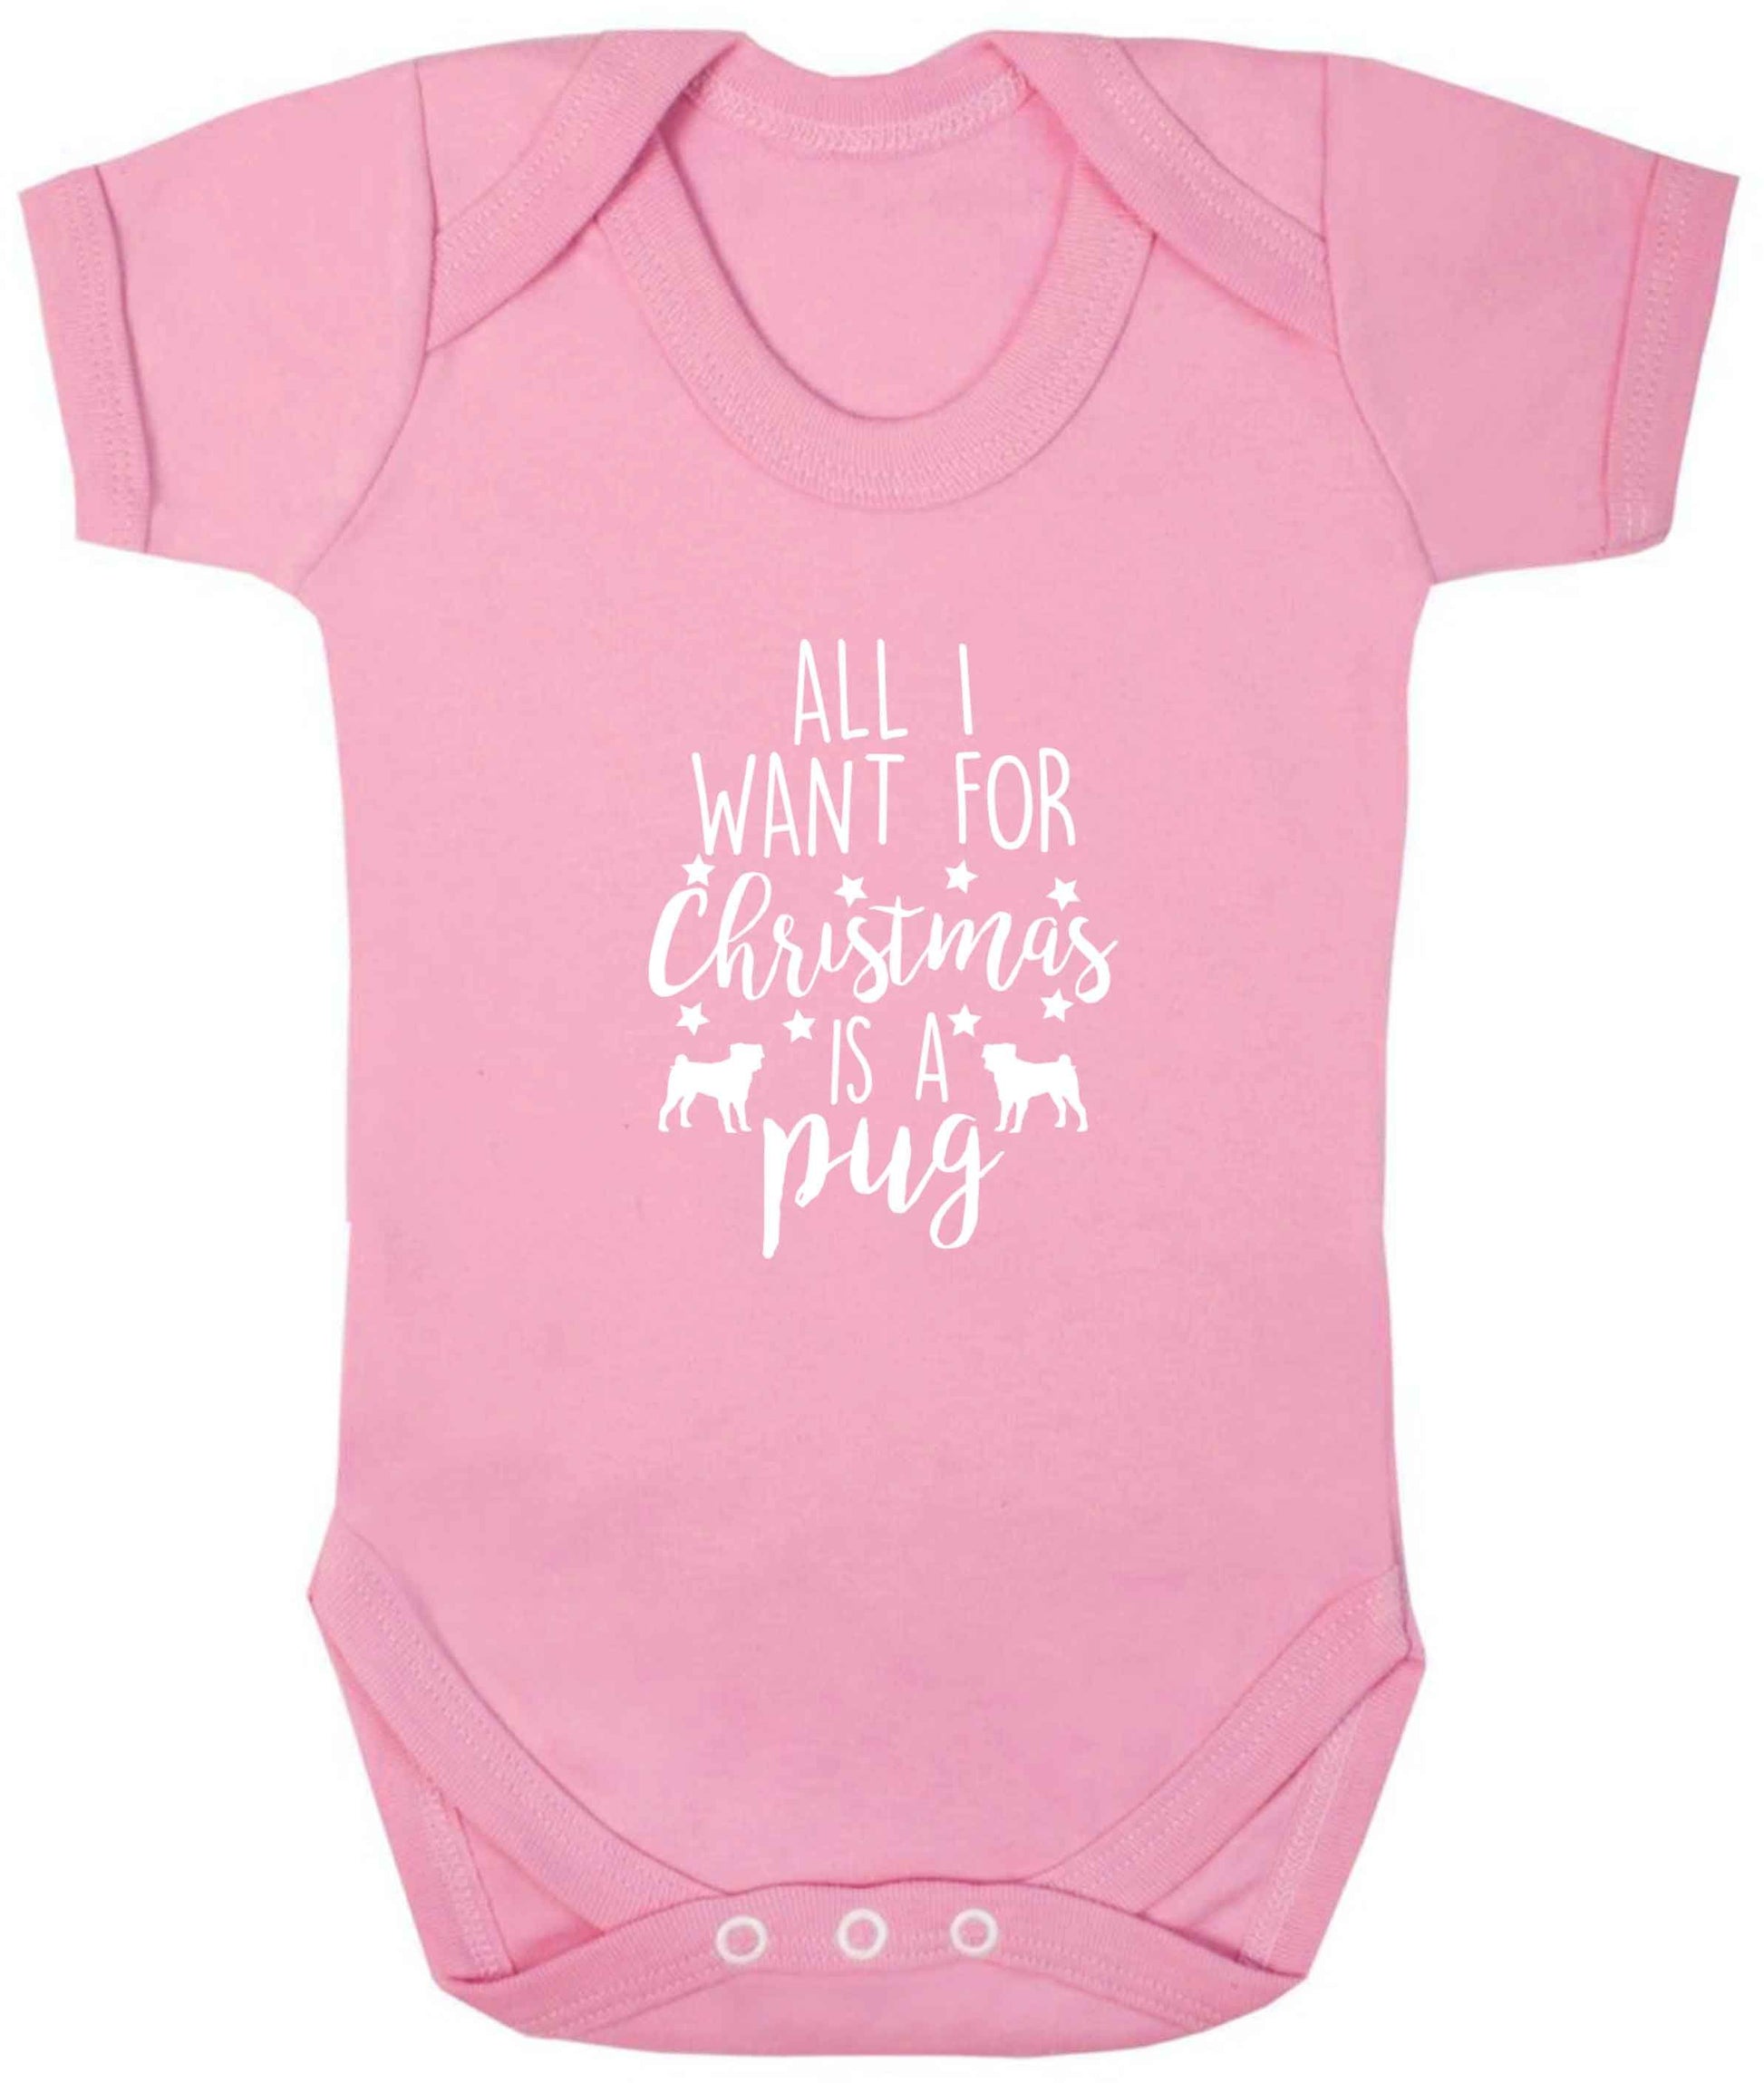 All I want for Christmas is a pug baby vest pale pink 18-24 months